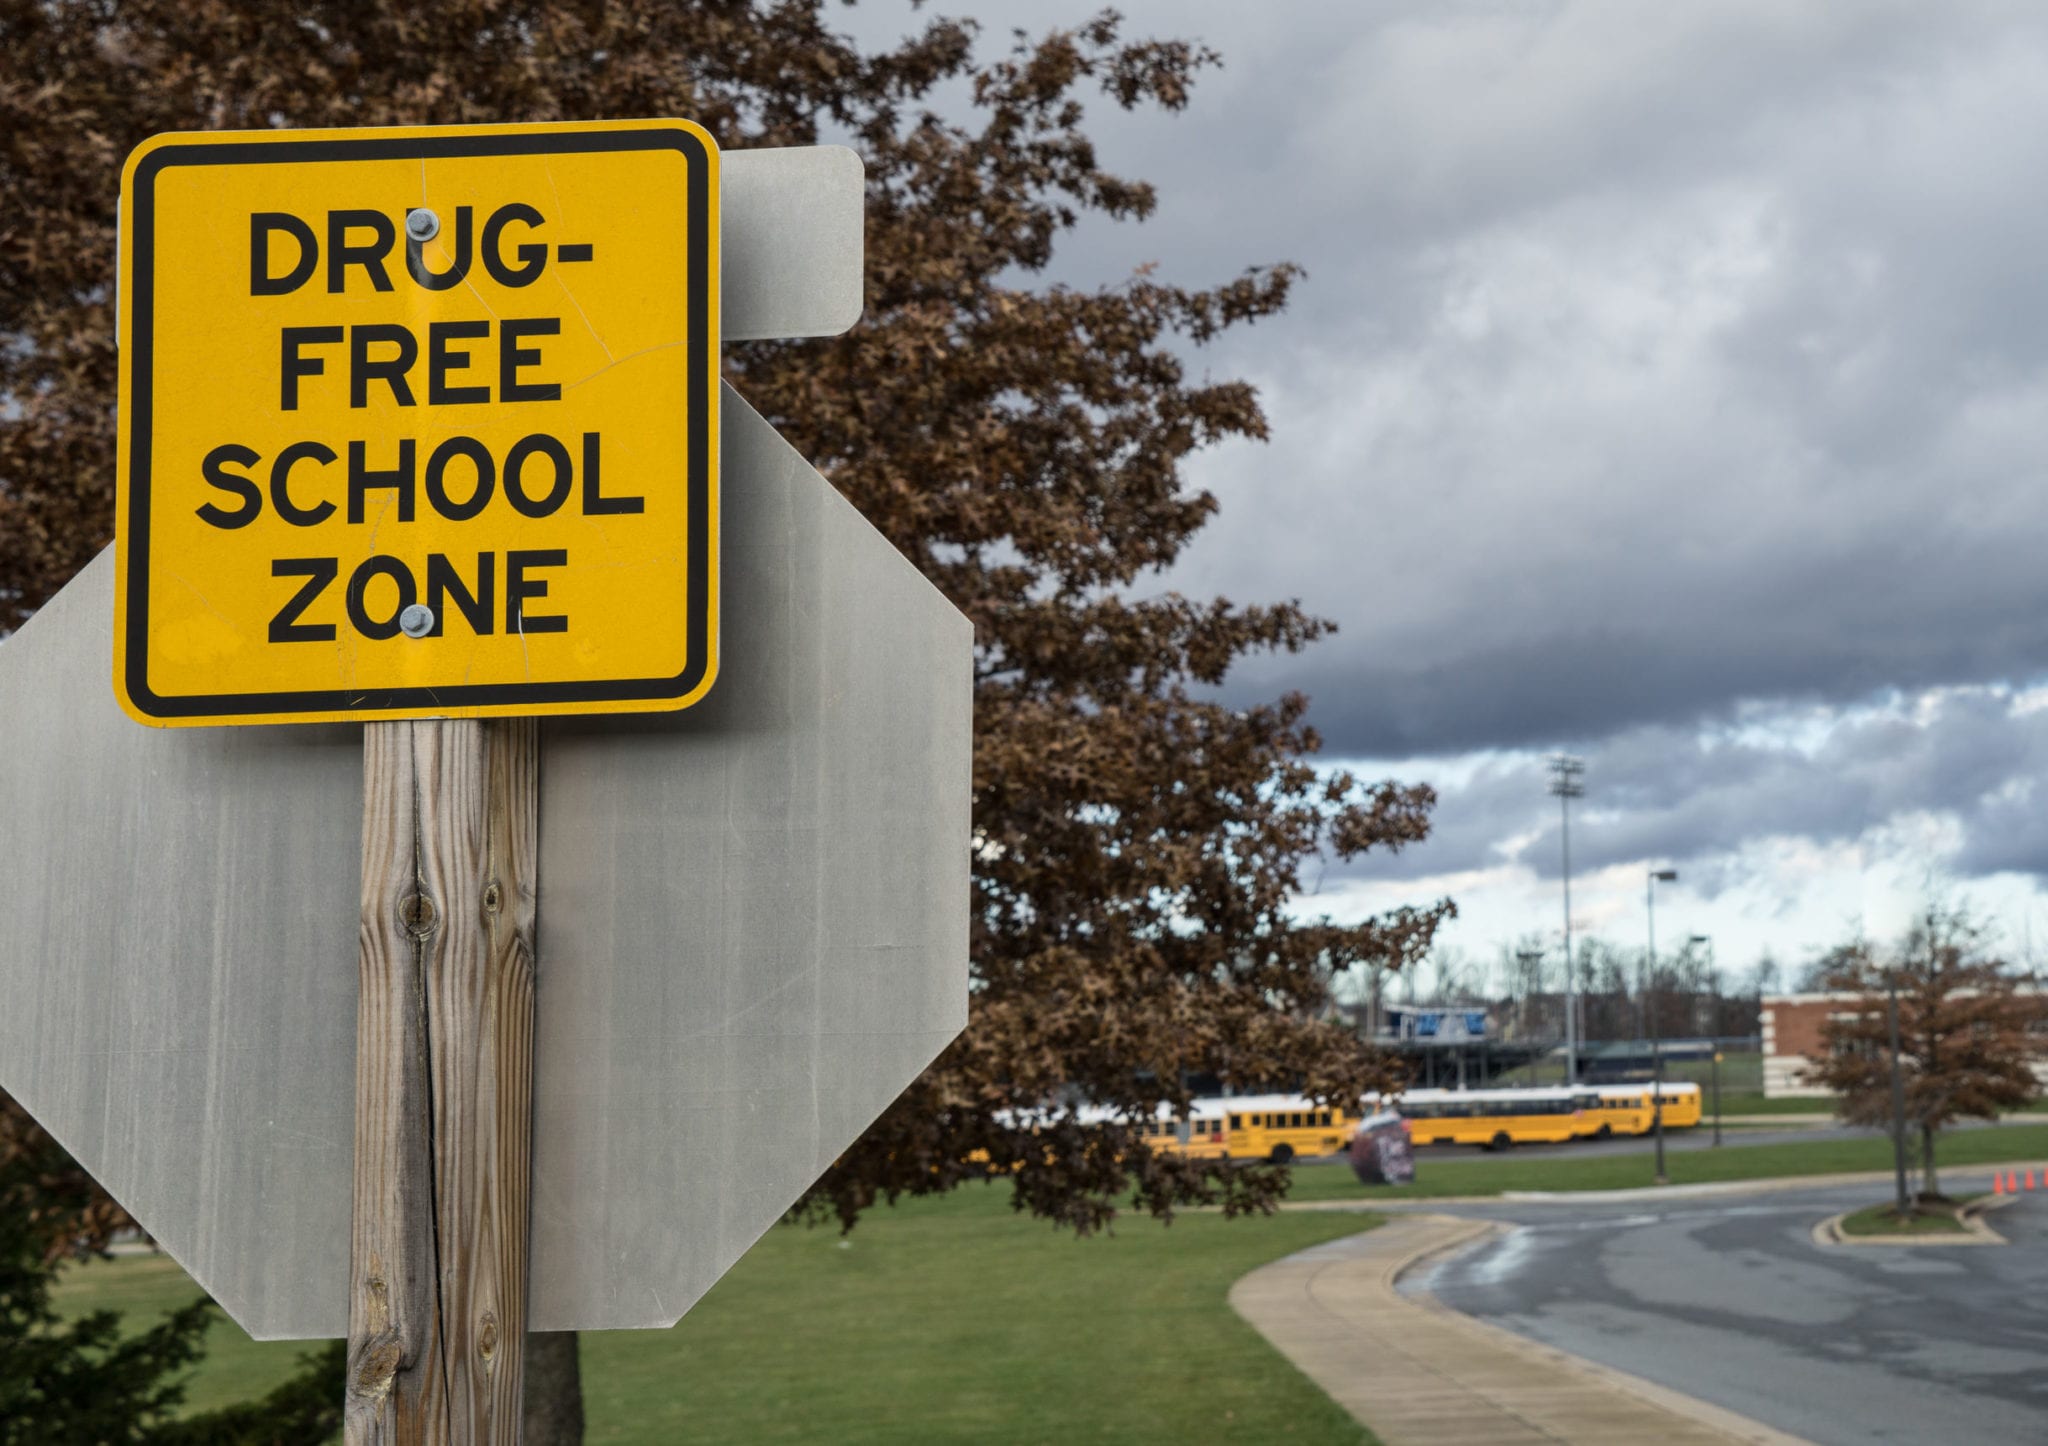 Minnesota's Drug-Free Zone Laws Designed to be Unfair